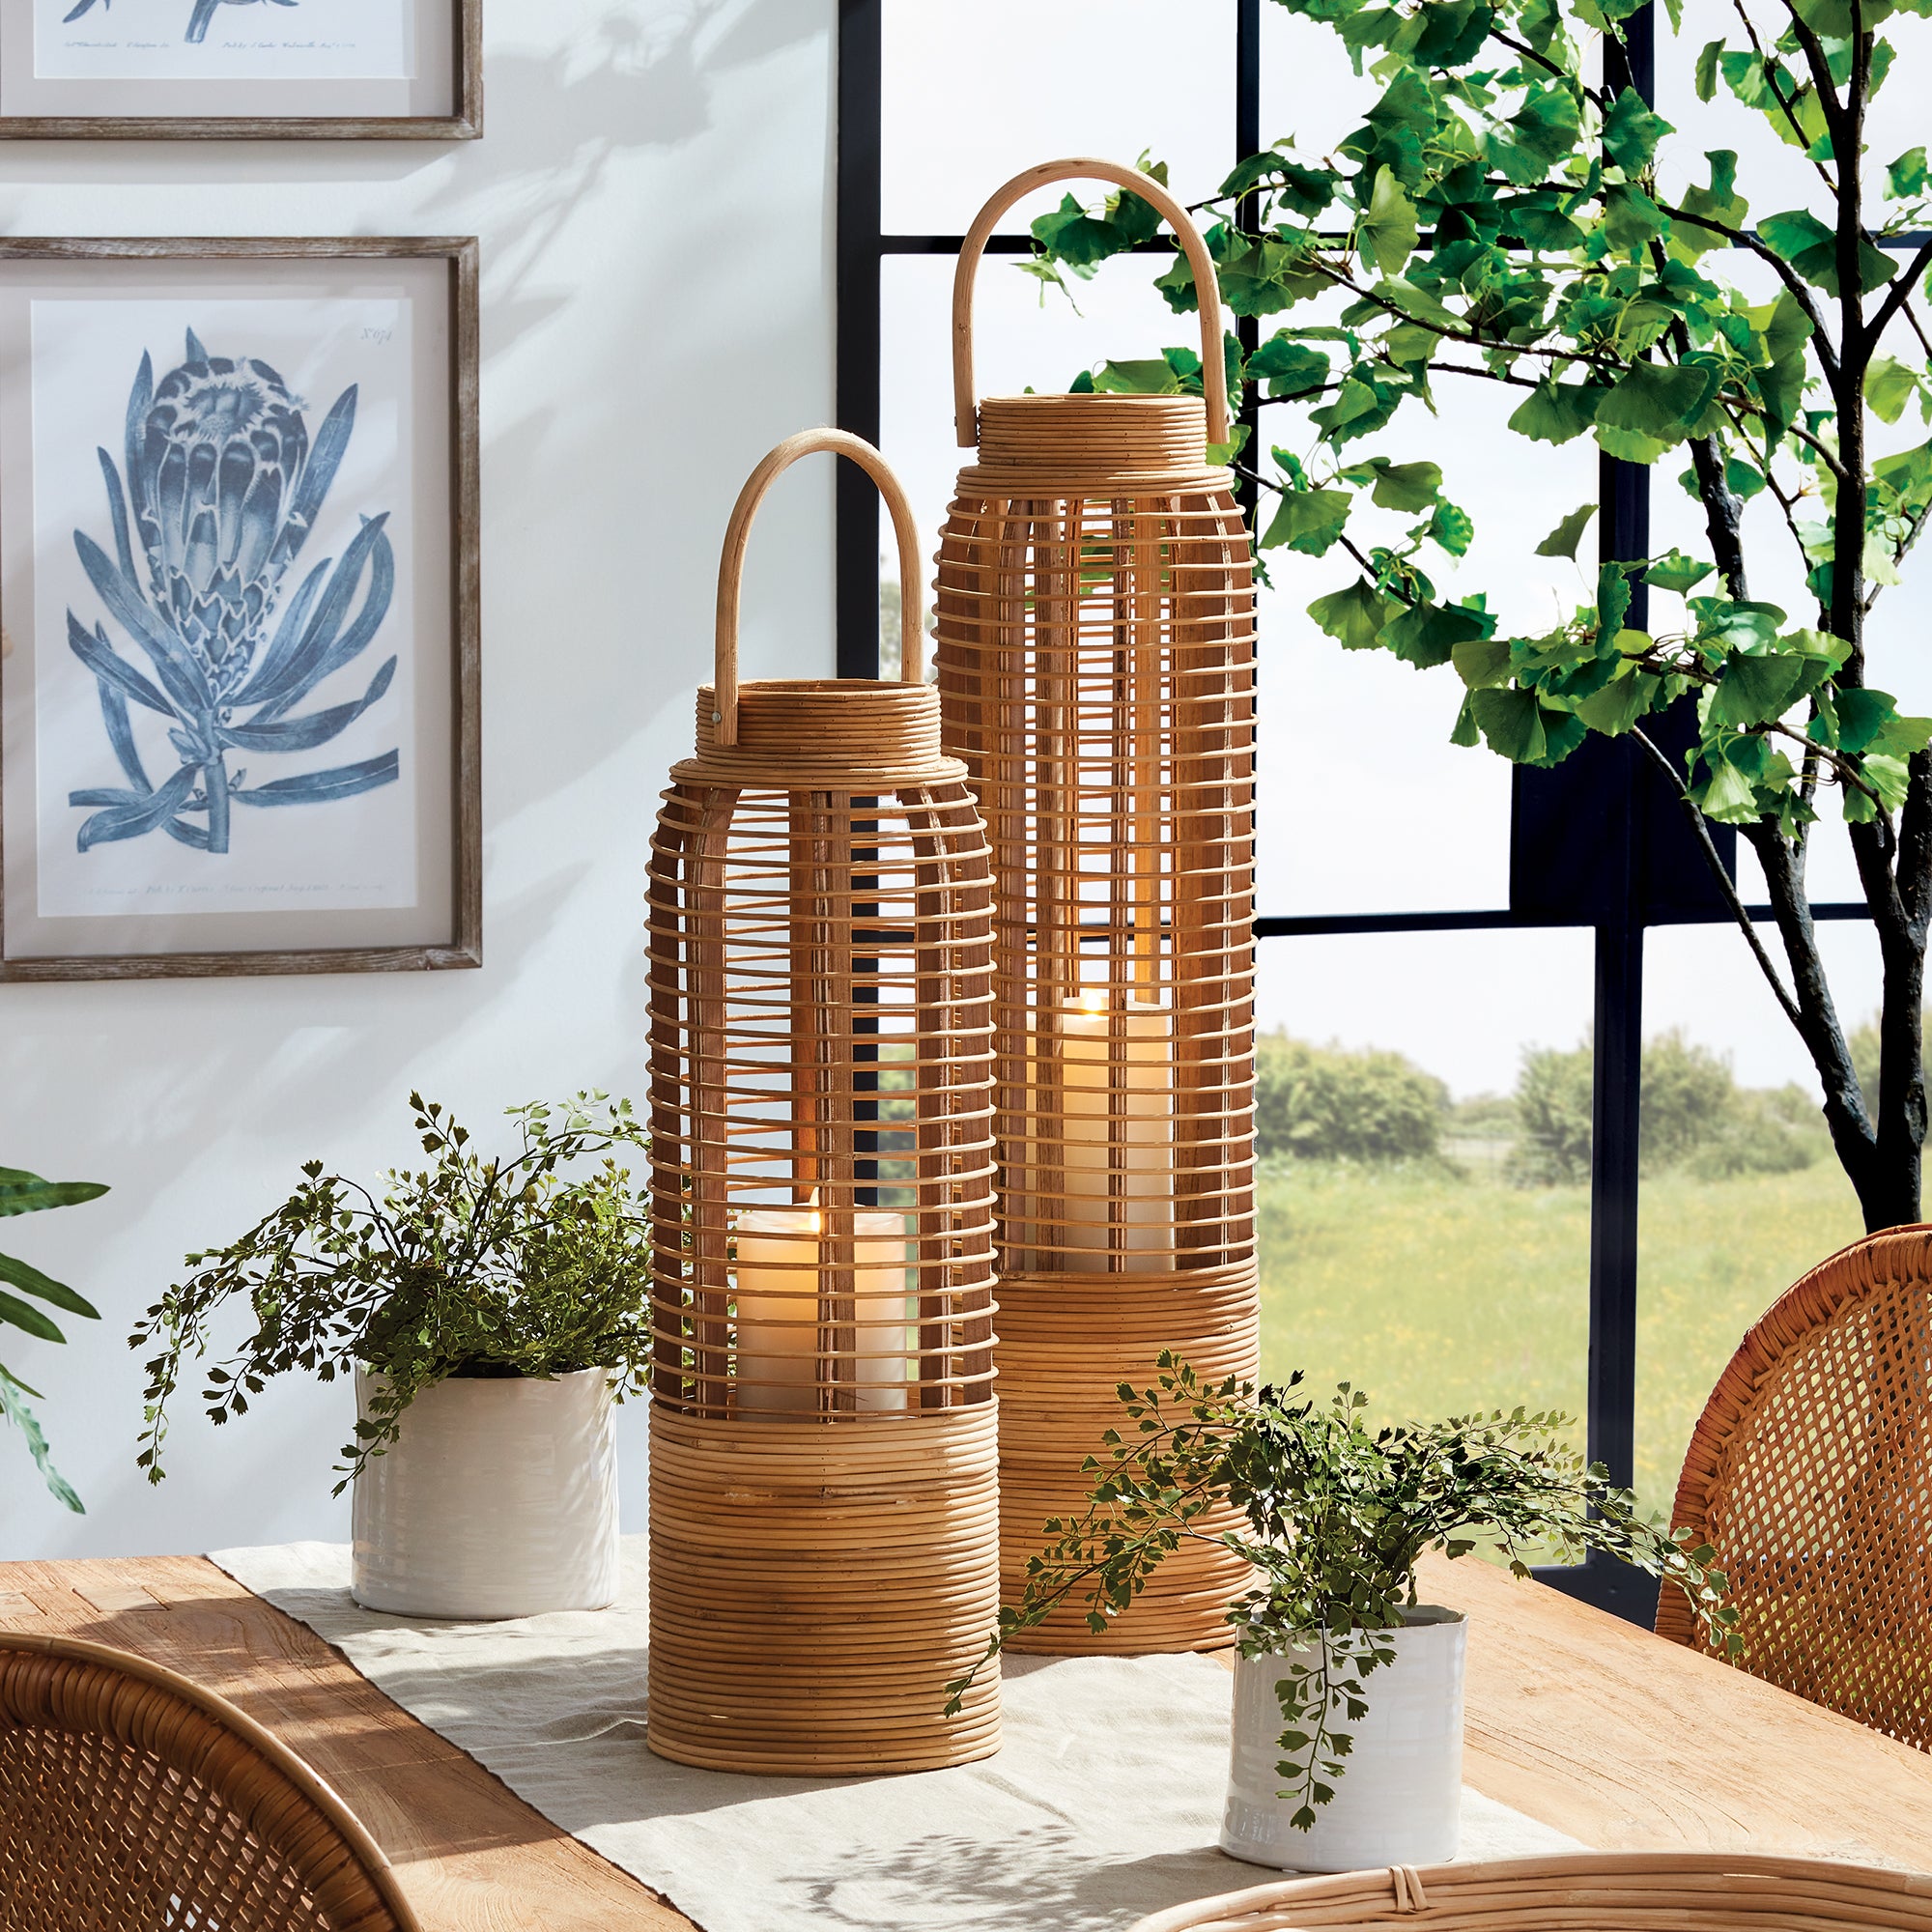 With a tall and slender rattan body, this large scale lantern really makes a statement. At home in the coastal setting or anywhere needing a touch of nature. Amethyst Home provides interior design, new construction, custom furniture, and area rugs in the Alpharetta metro area.